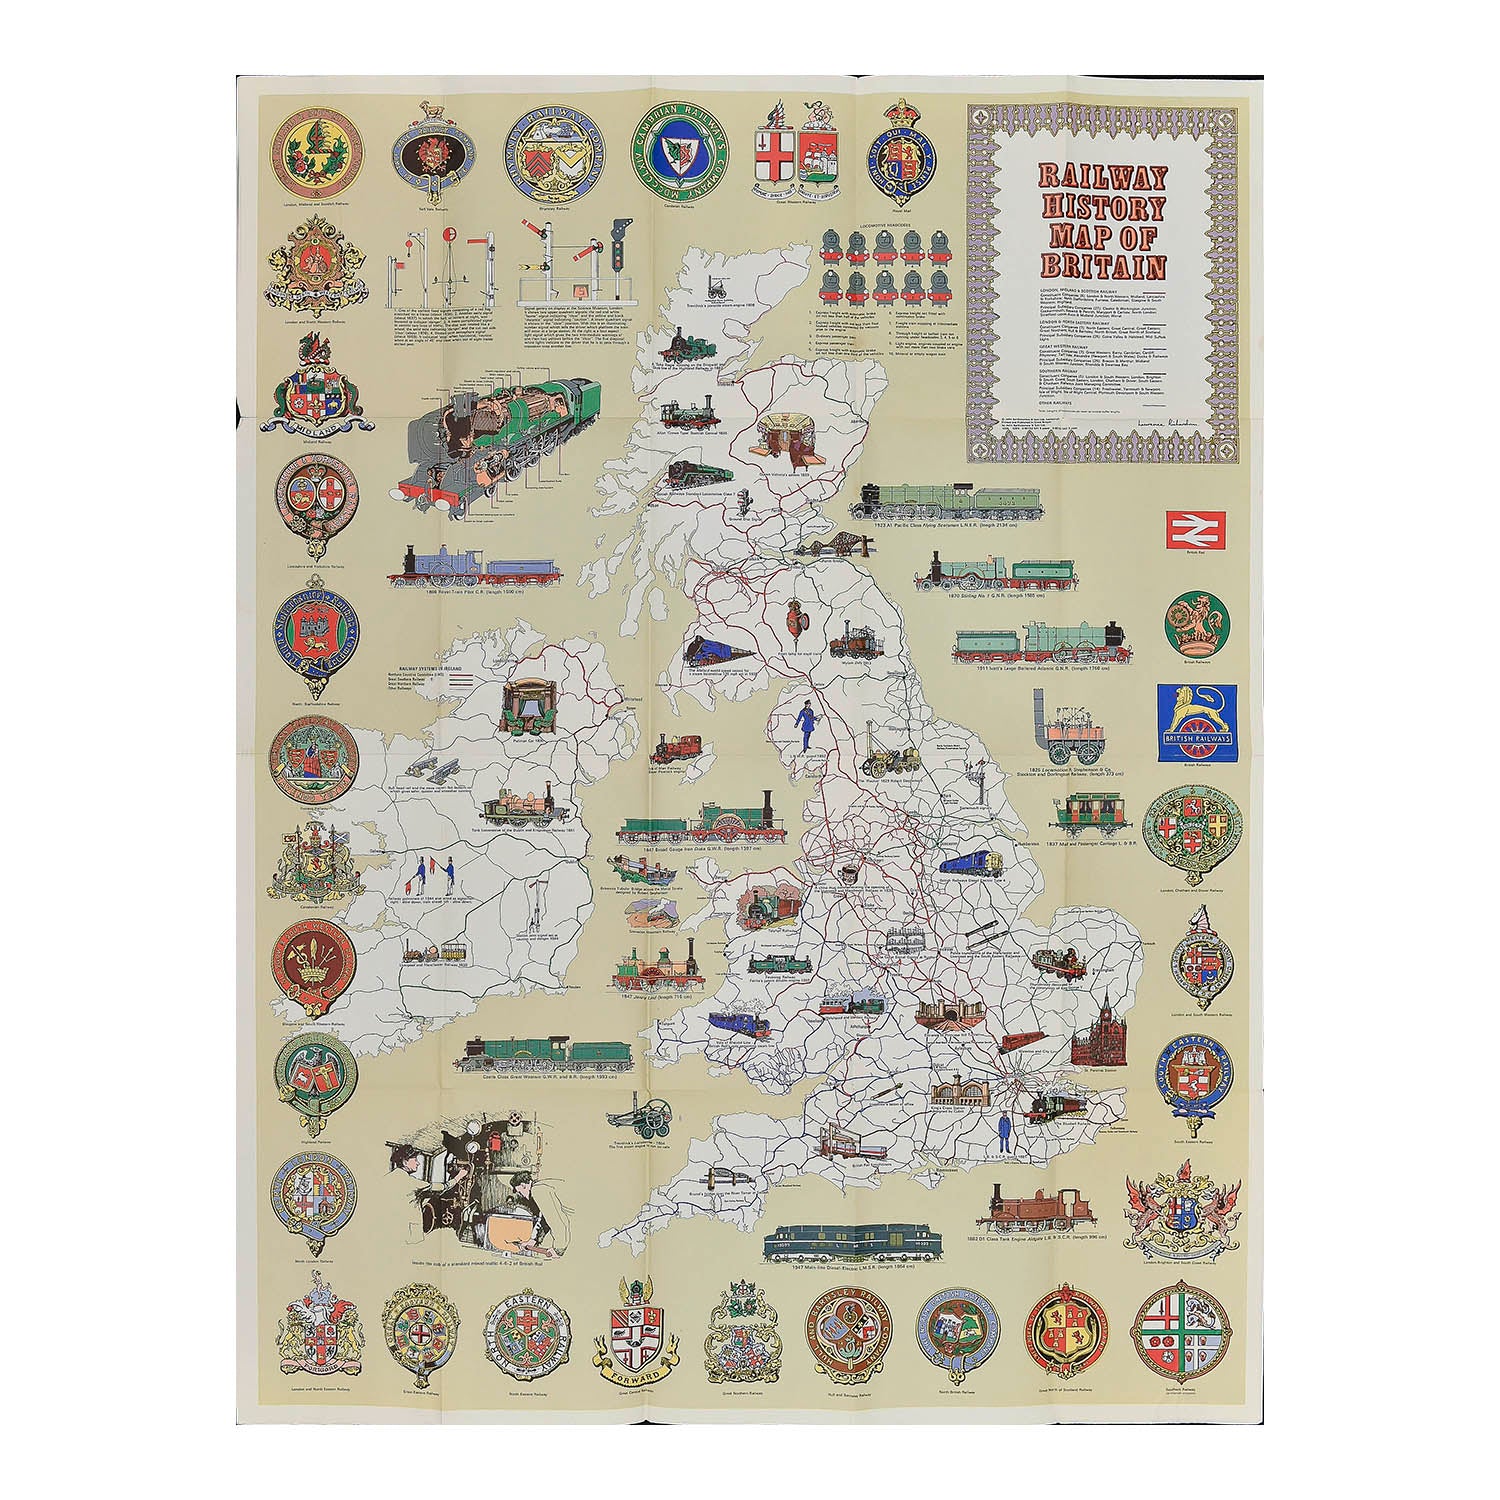 folding map of British Railway history, published by John Bartholomew & Son Ltd, Edinburgh, c. 1975. The map opens to show the British Isles illustrated with key moments from railway history within a border of over 30 railway company crests and logos